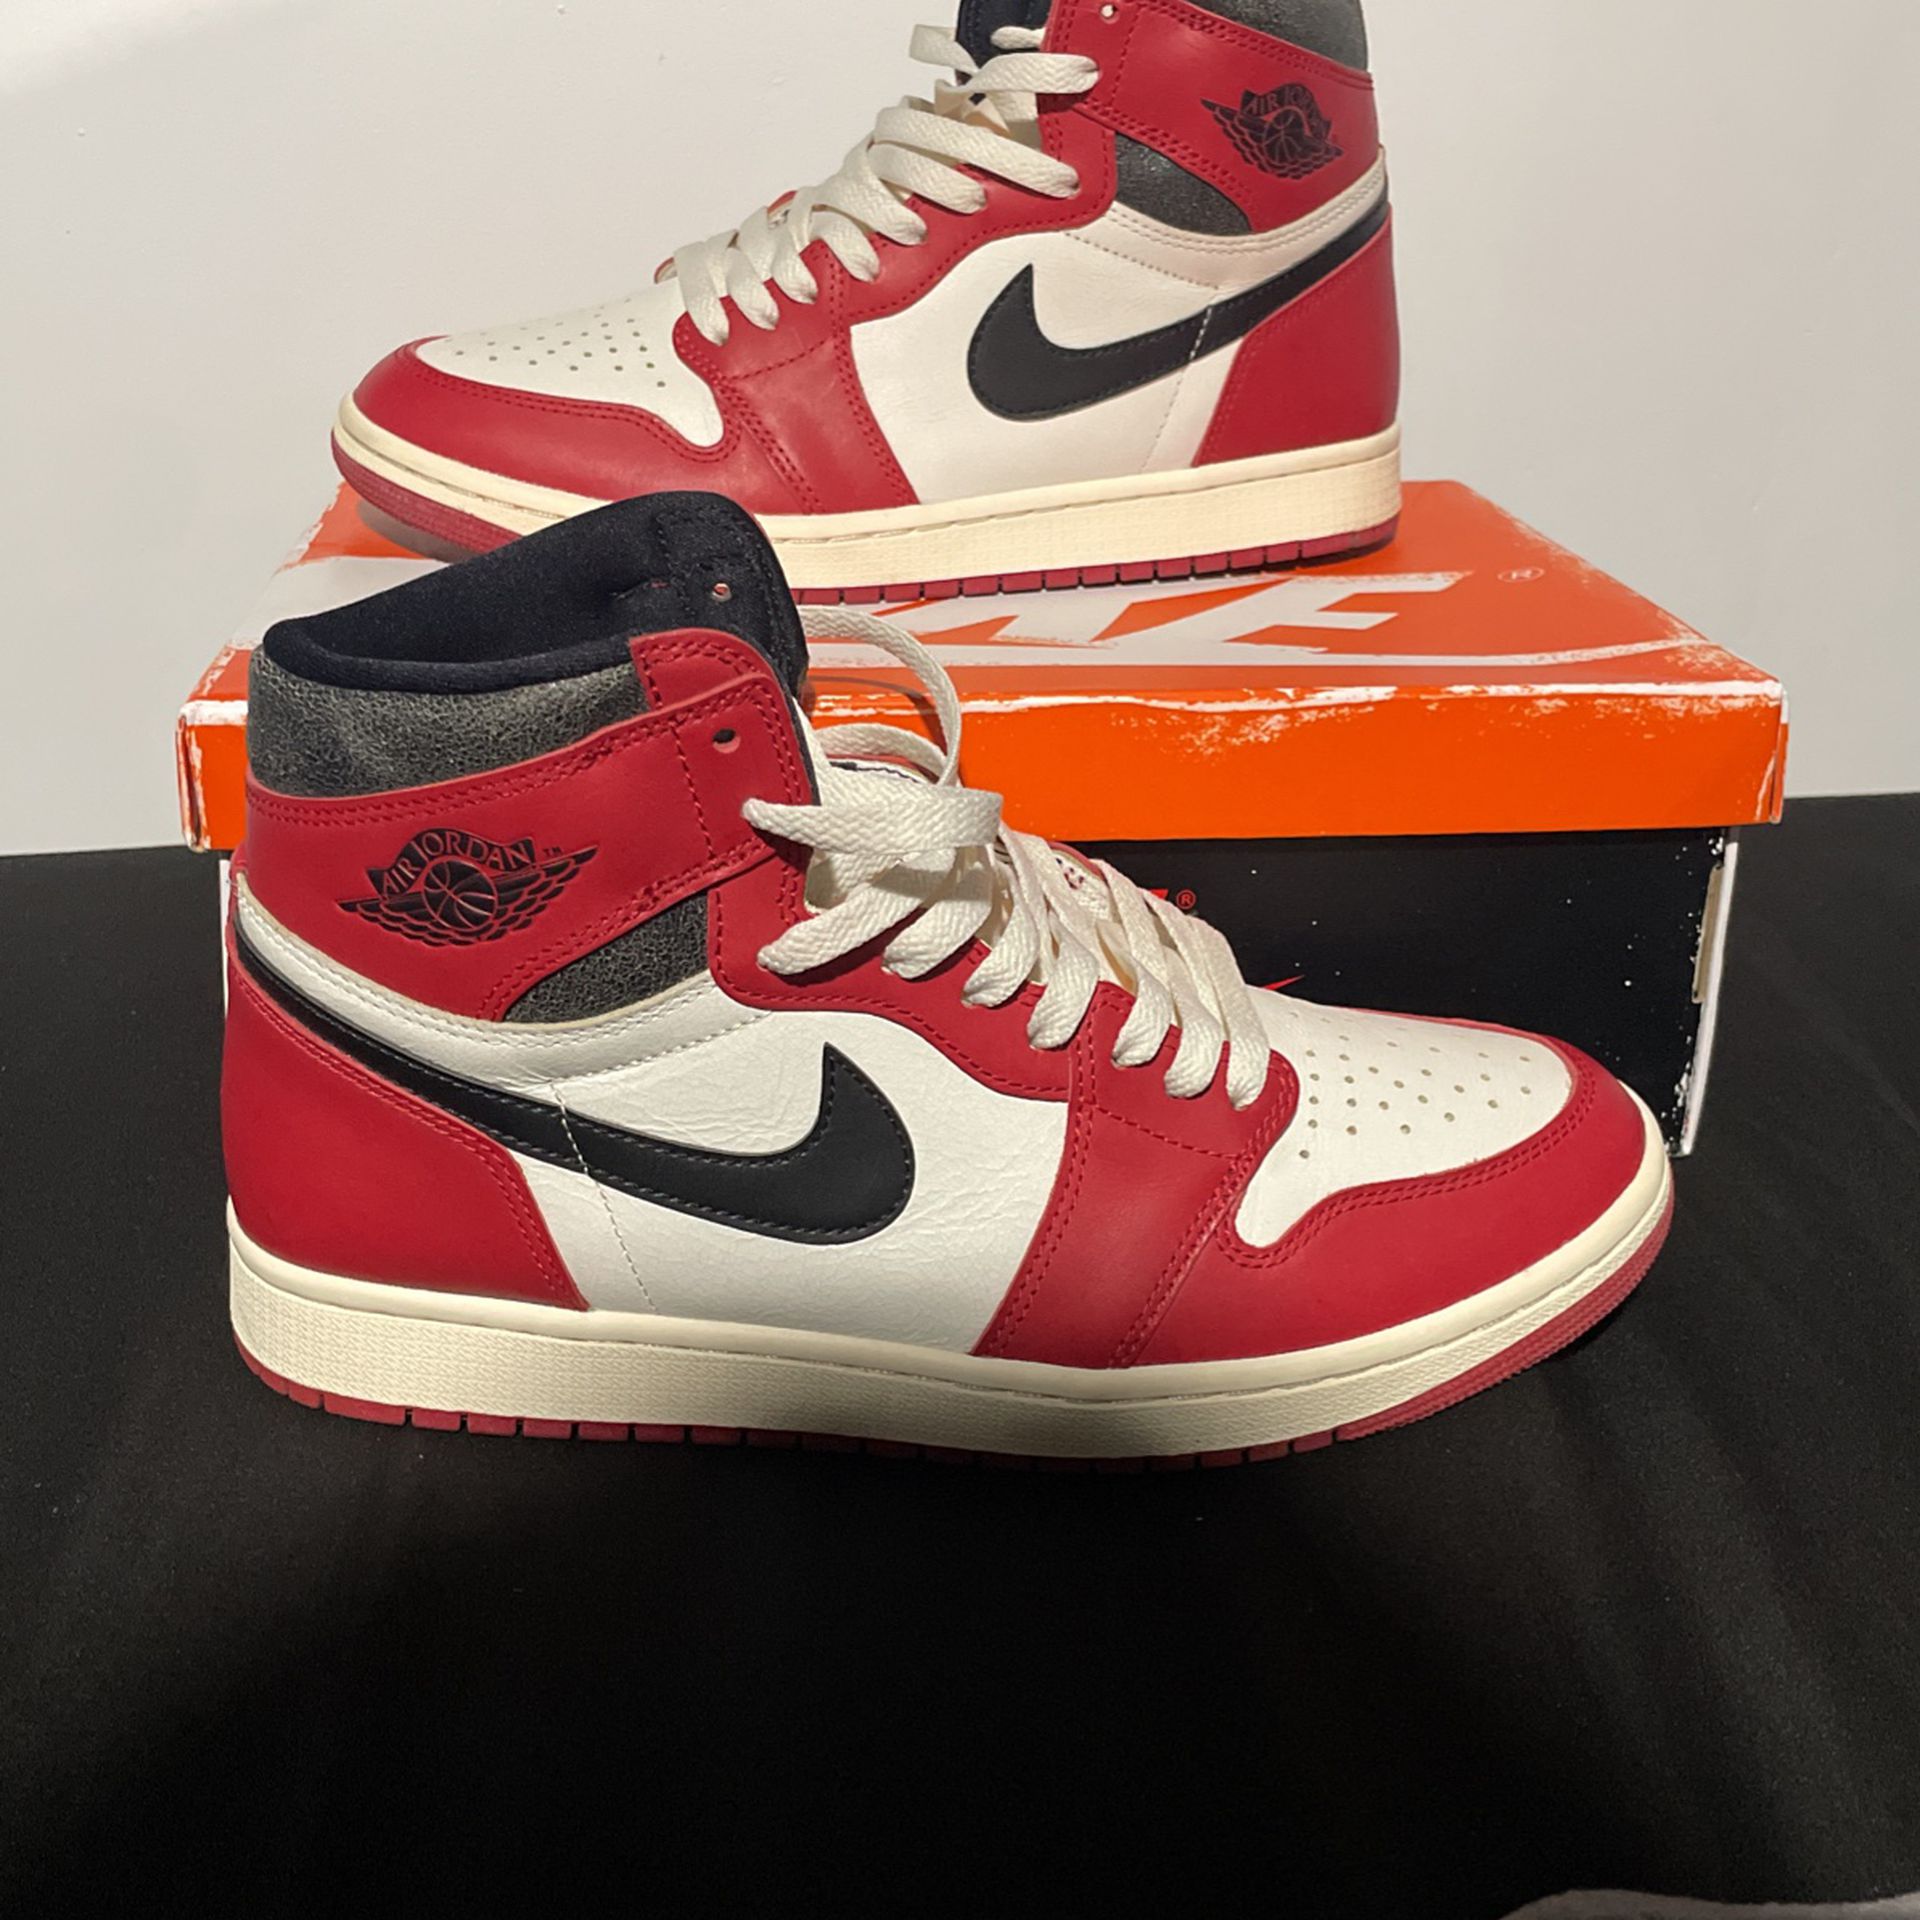 Jordan 1 lost and founds 